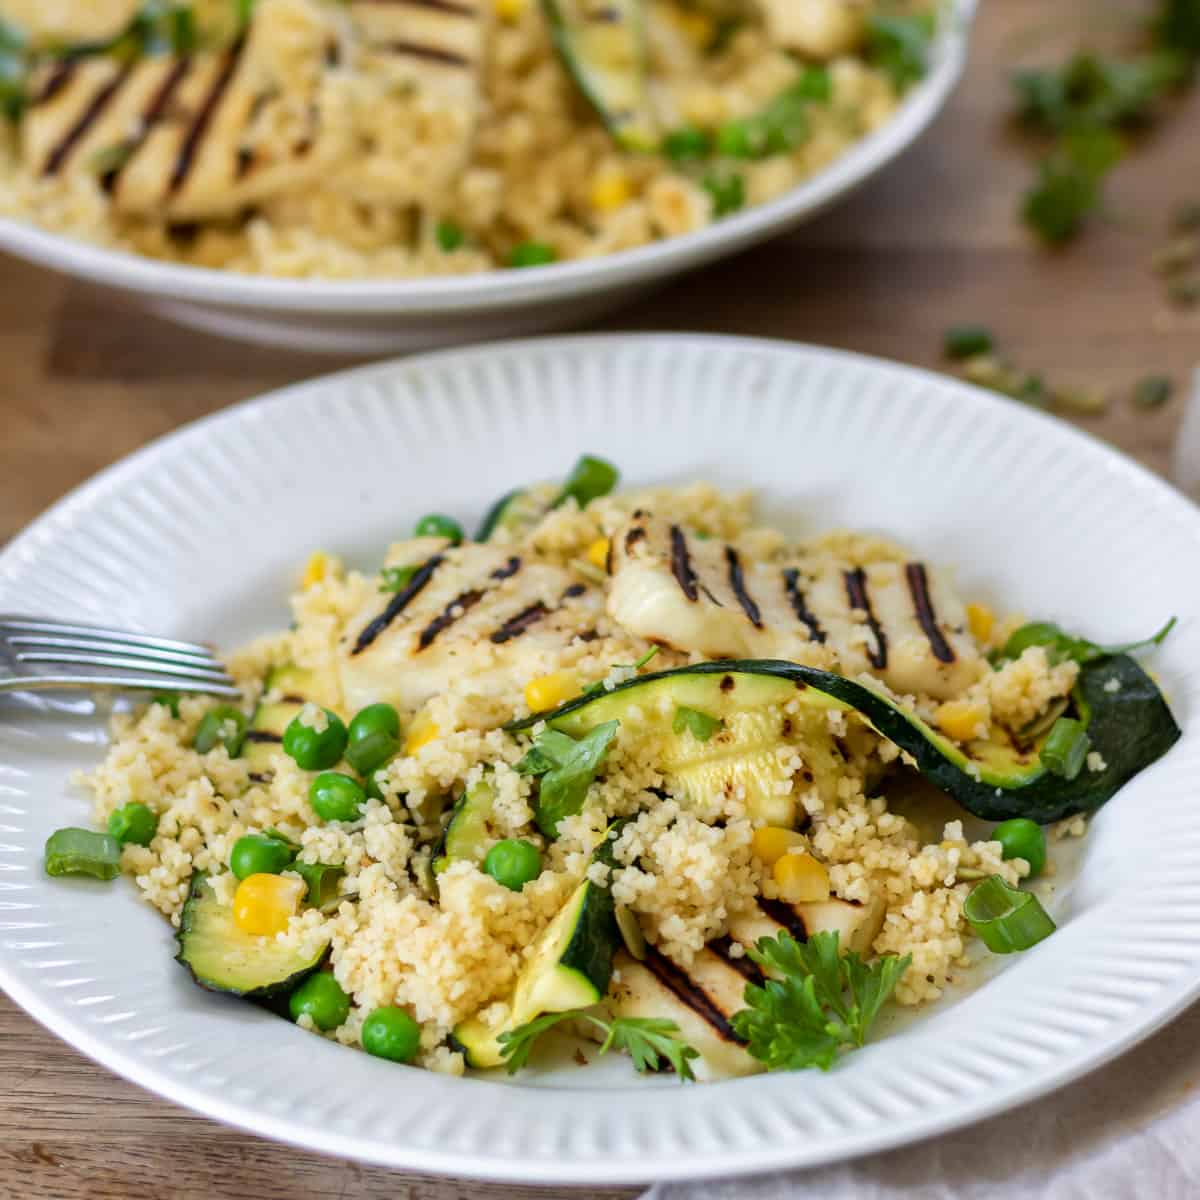 A plate of halloumi couscous with zucchini.